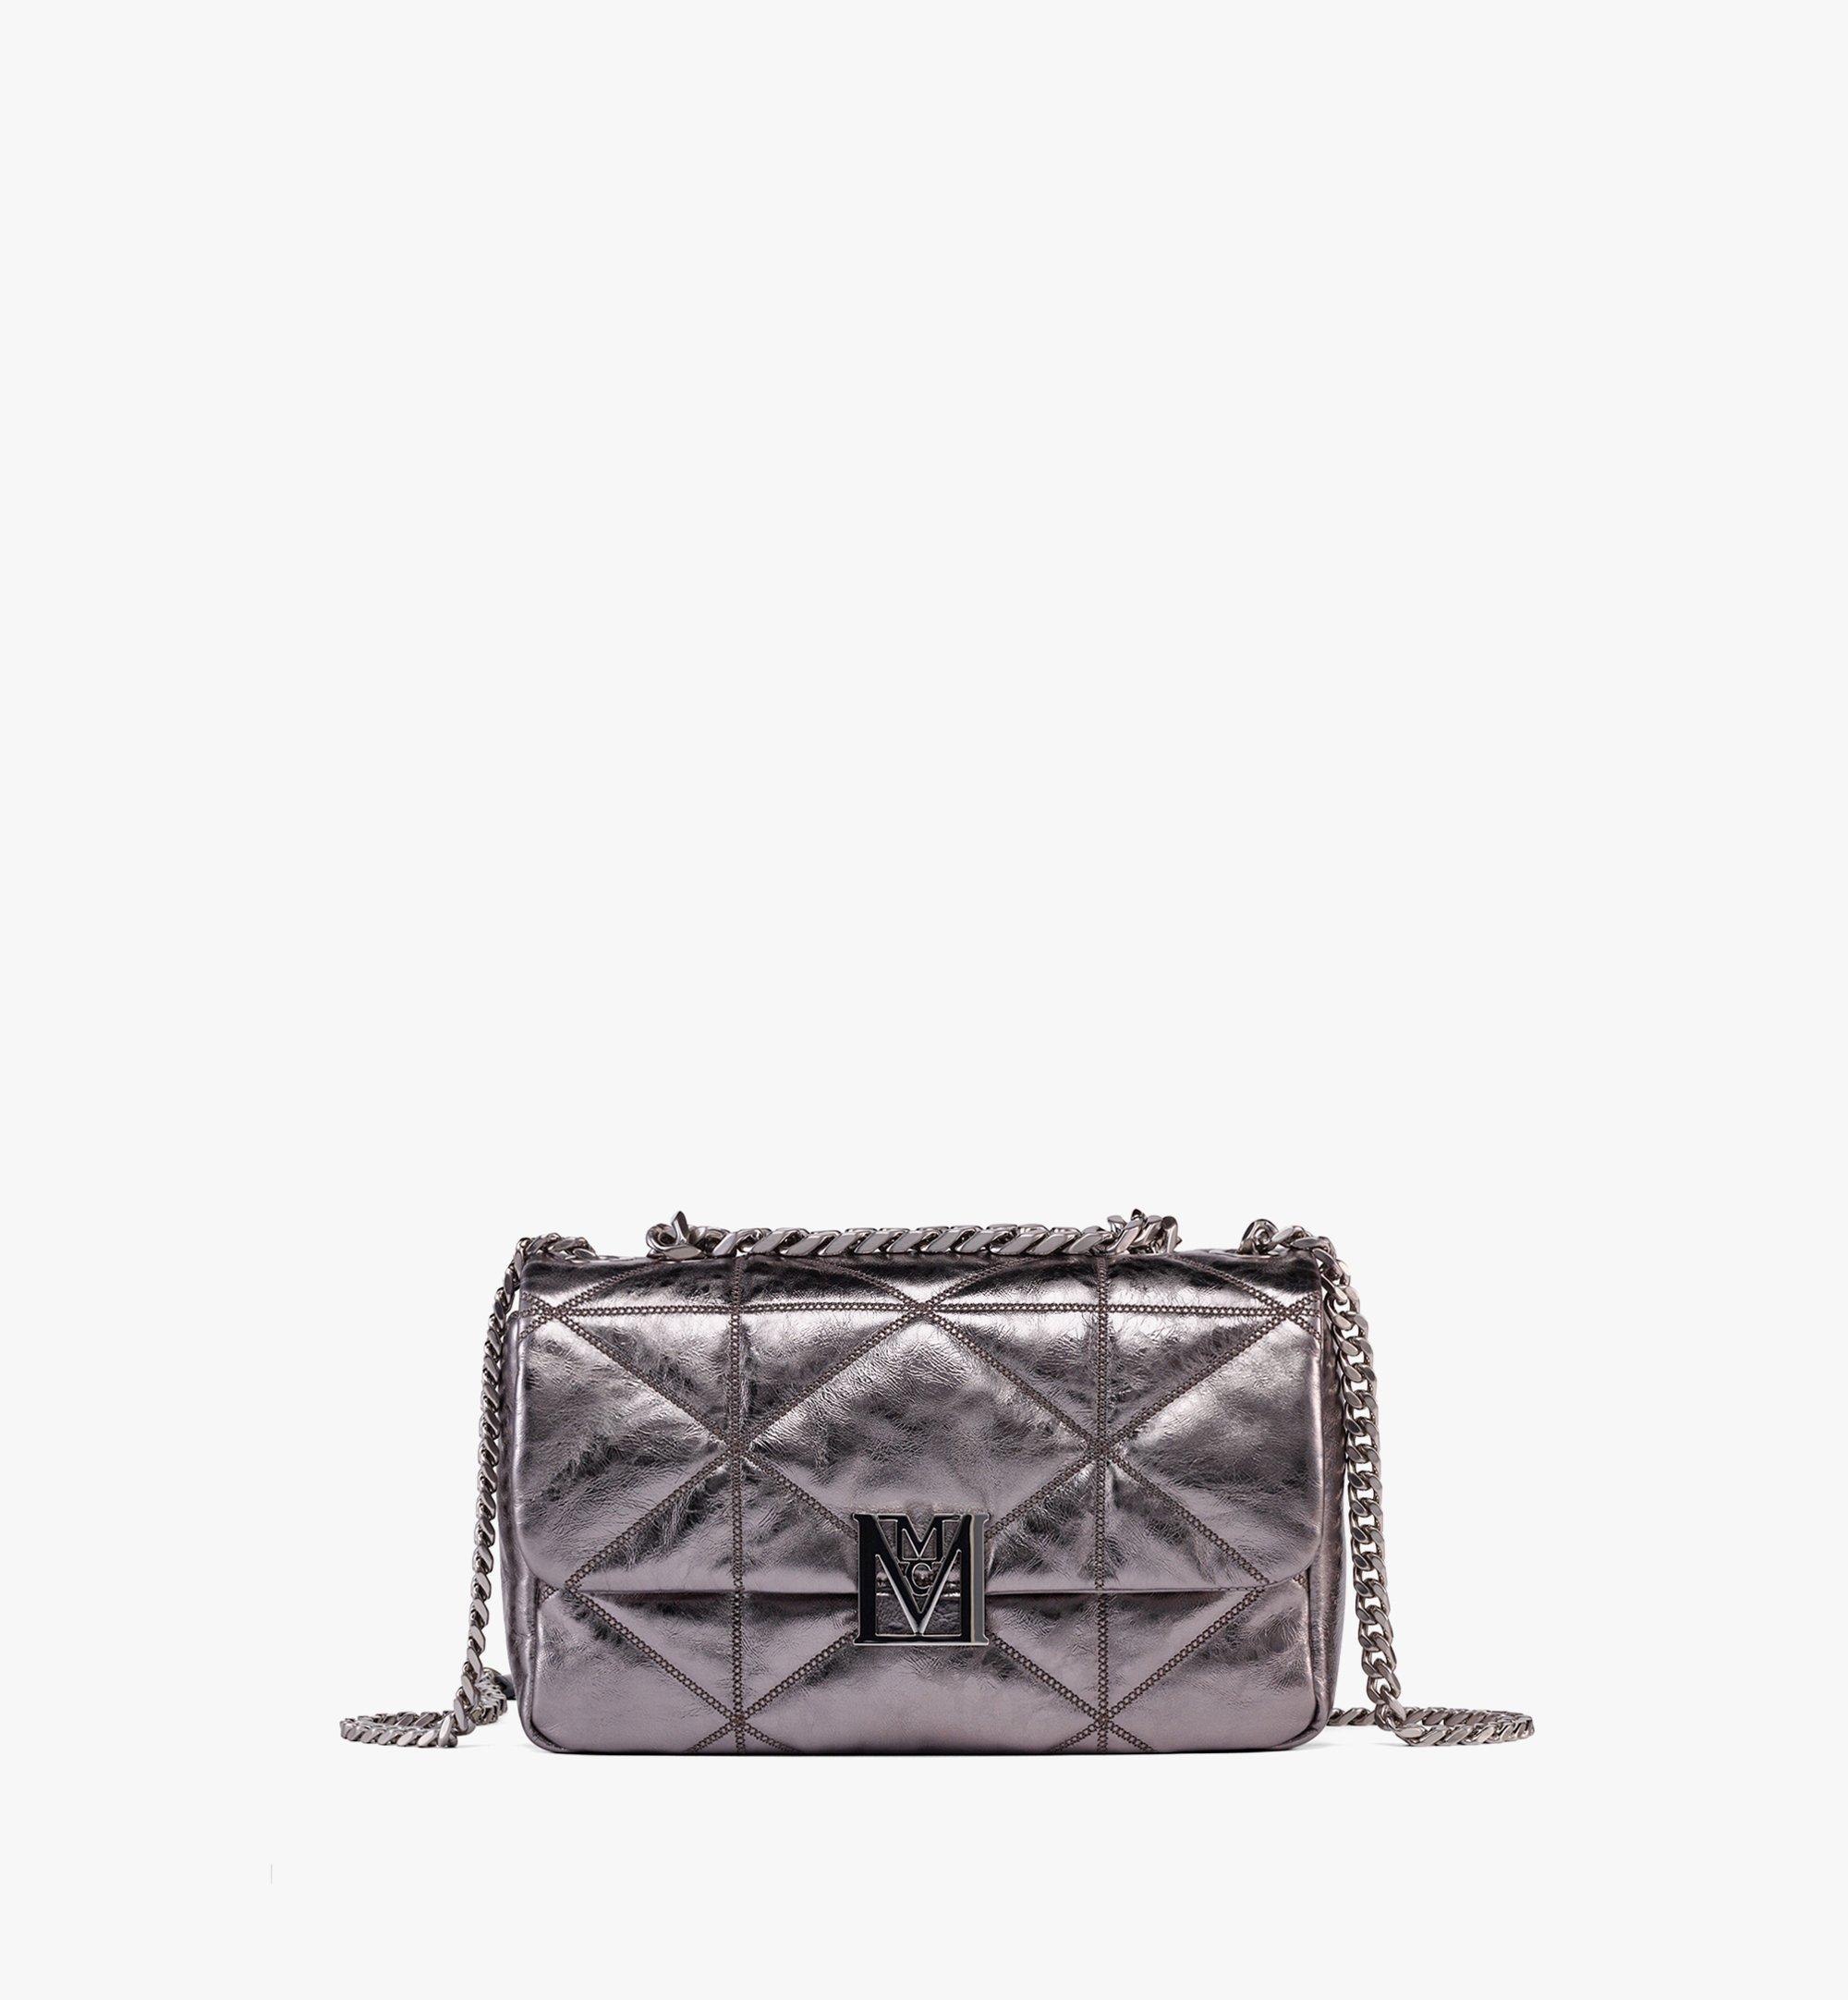 MCM Travia Quilted Shoulder Bag in Crushed Calf Leather Silver MWSDALM05SV001 Alternate View 1